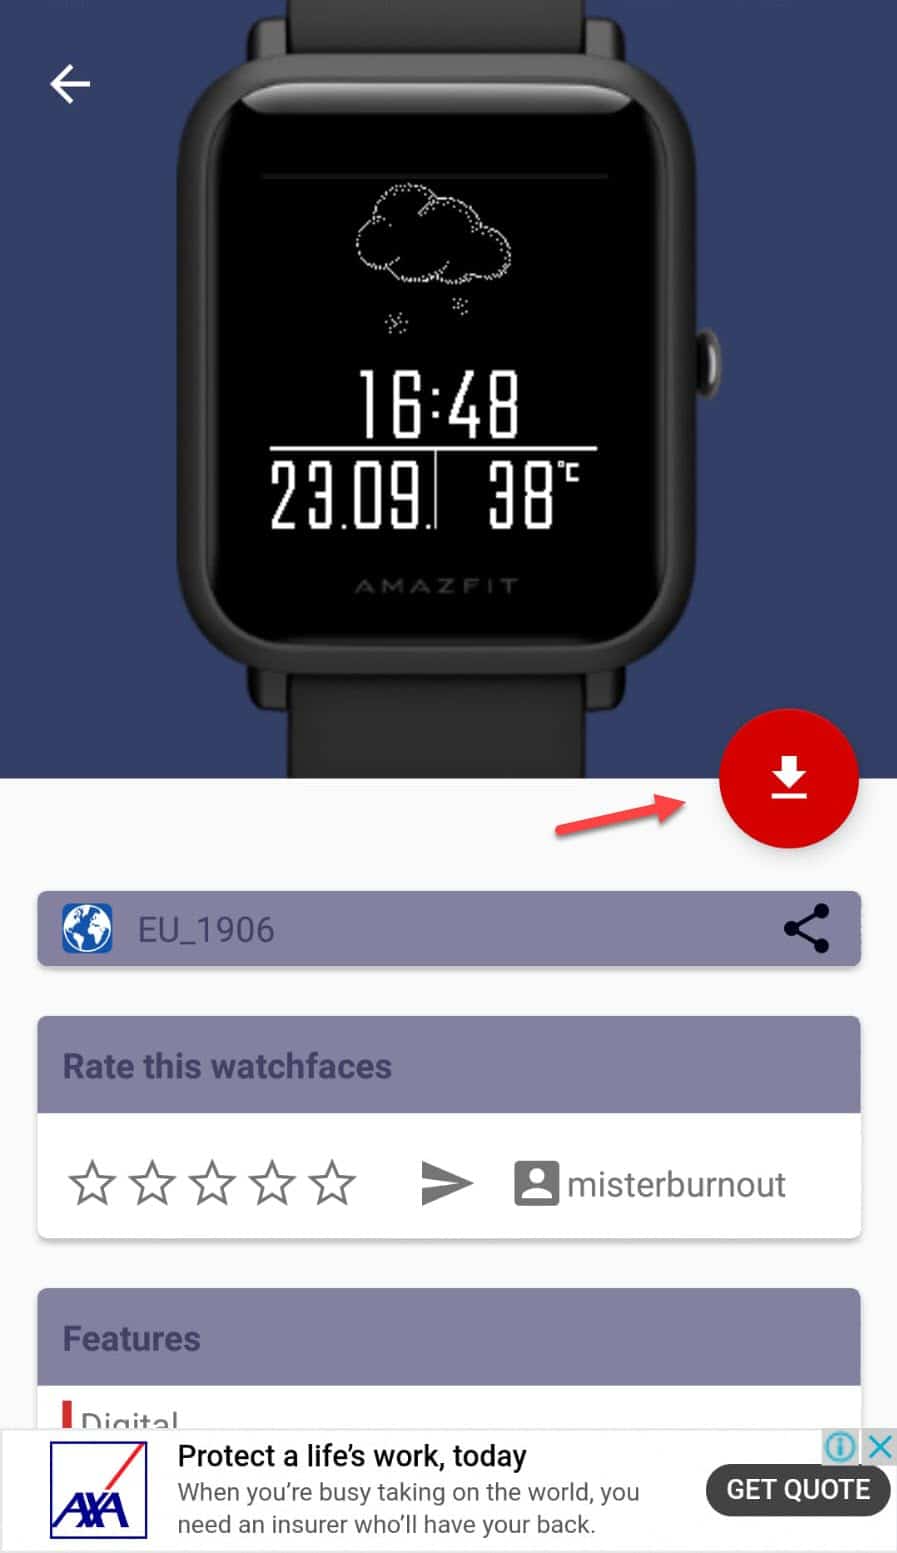 step 2 - Downloading Amazfit Custom watch face from the app